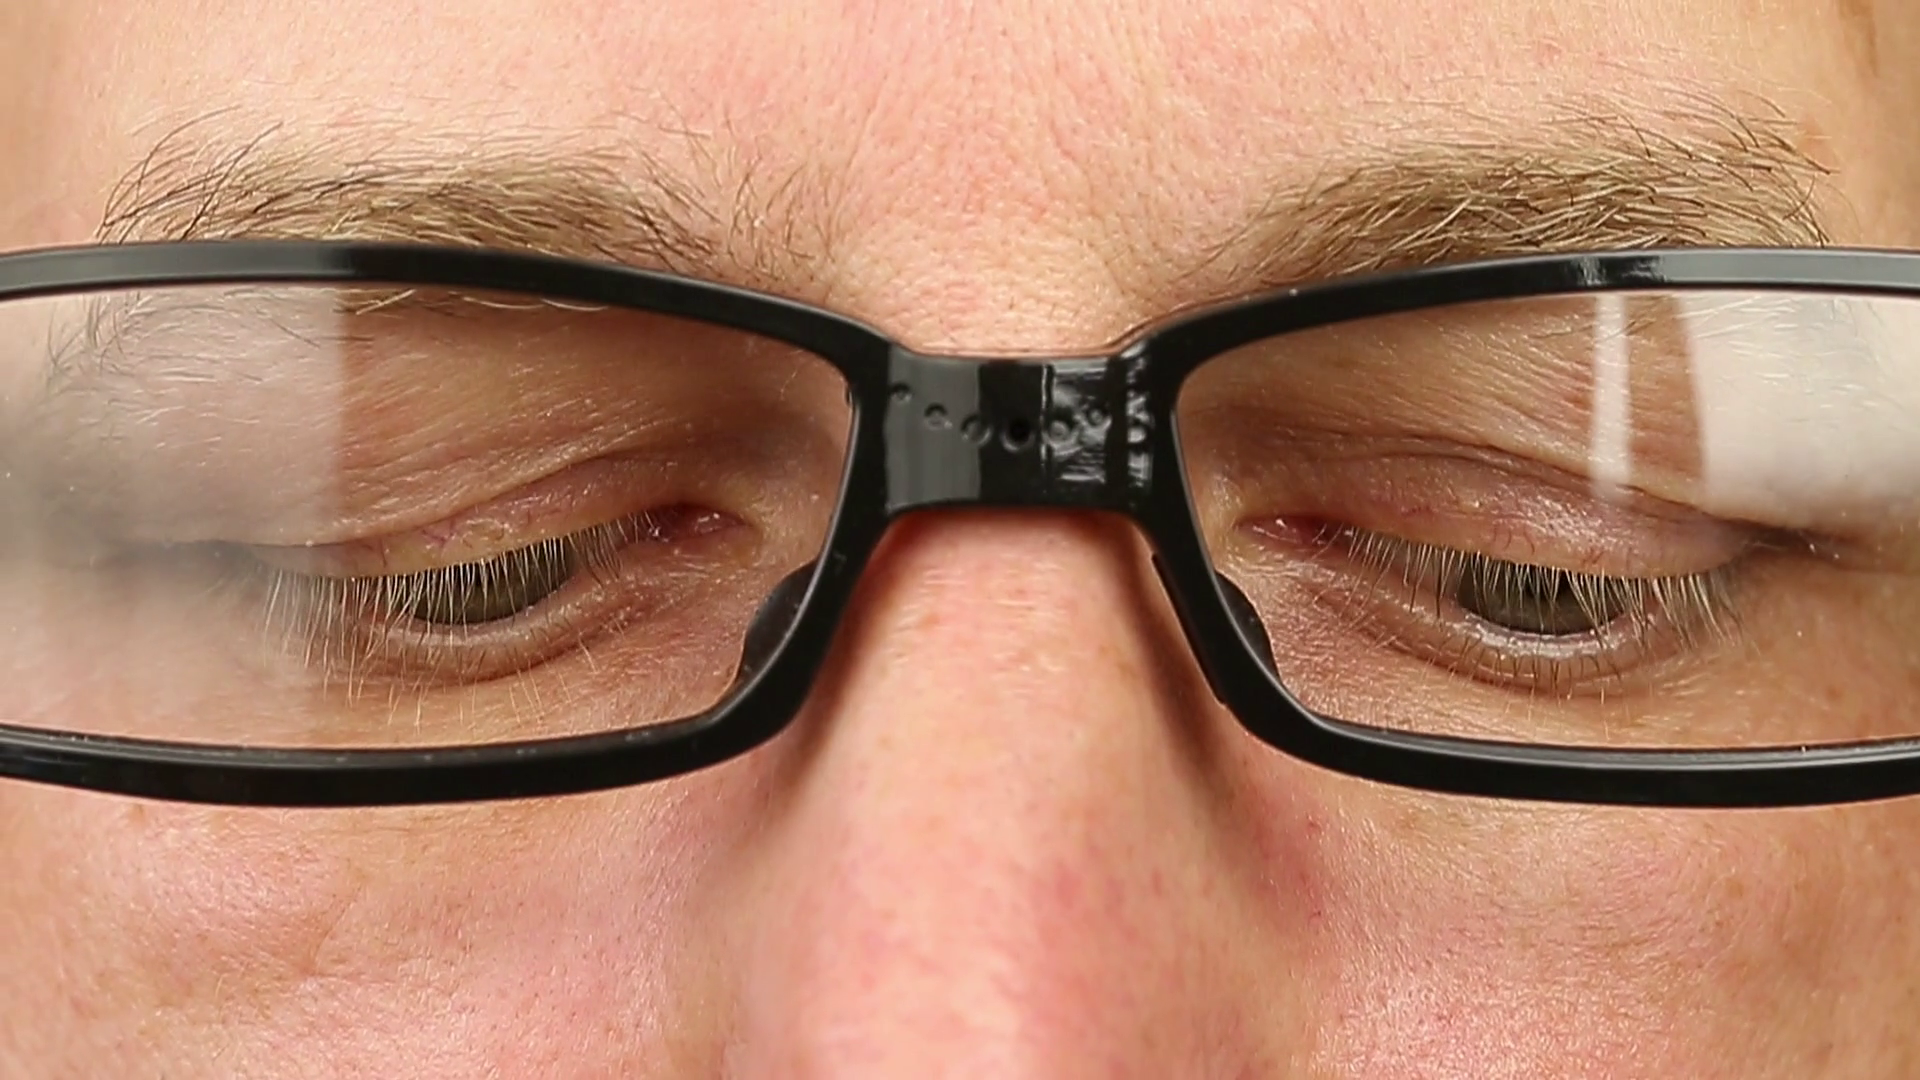 Adult man in eyeglasses extremely close-up view. Thinking looking ...